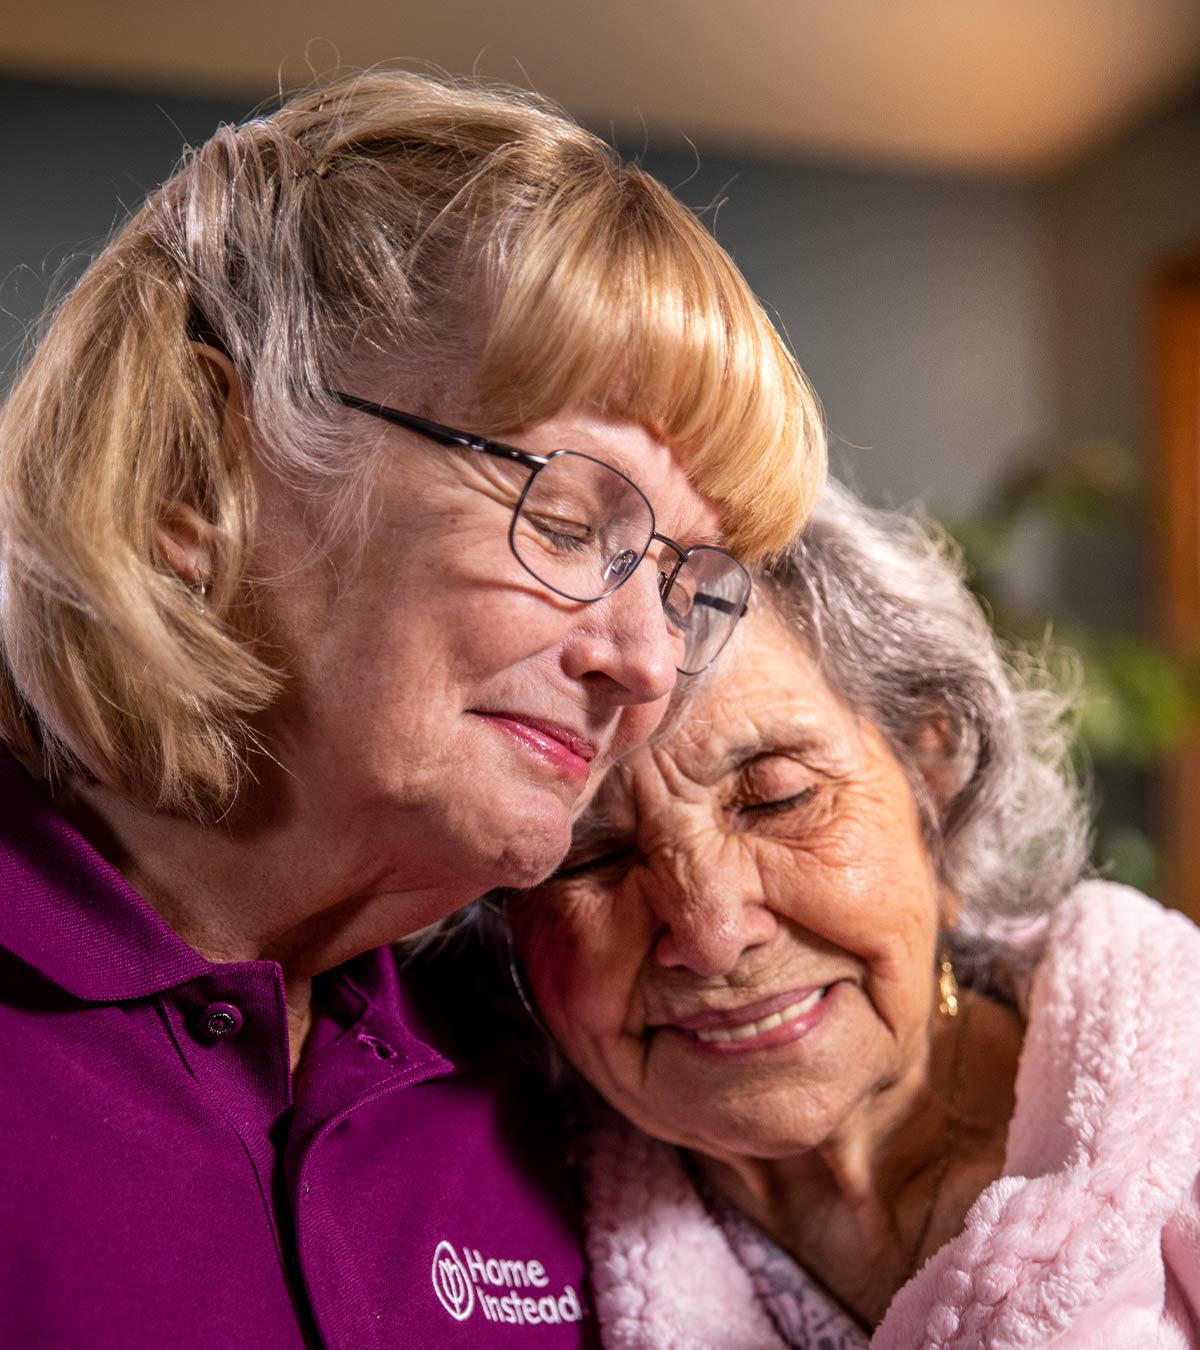 CAREGiver providing in-home senior care services. Home Instead of Clearwater, FL provides Elder Care to aging adults. 